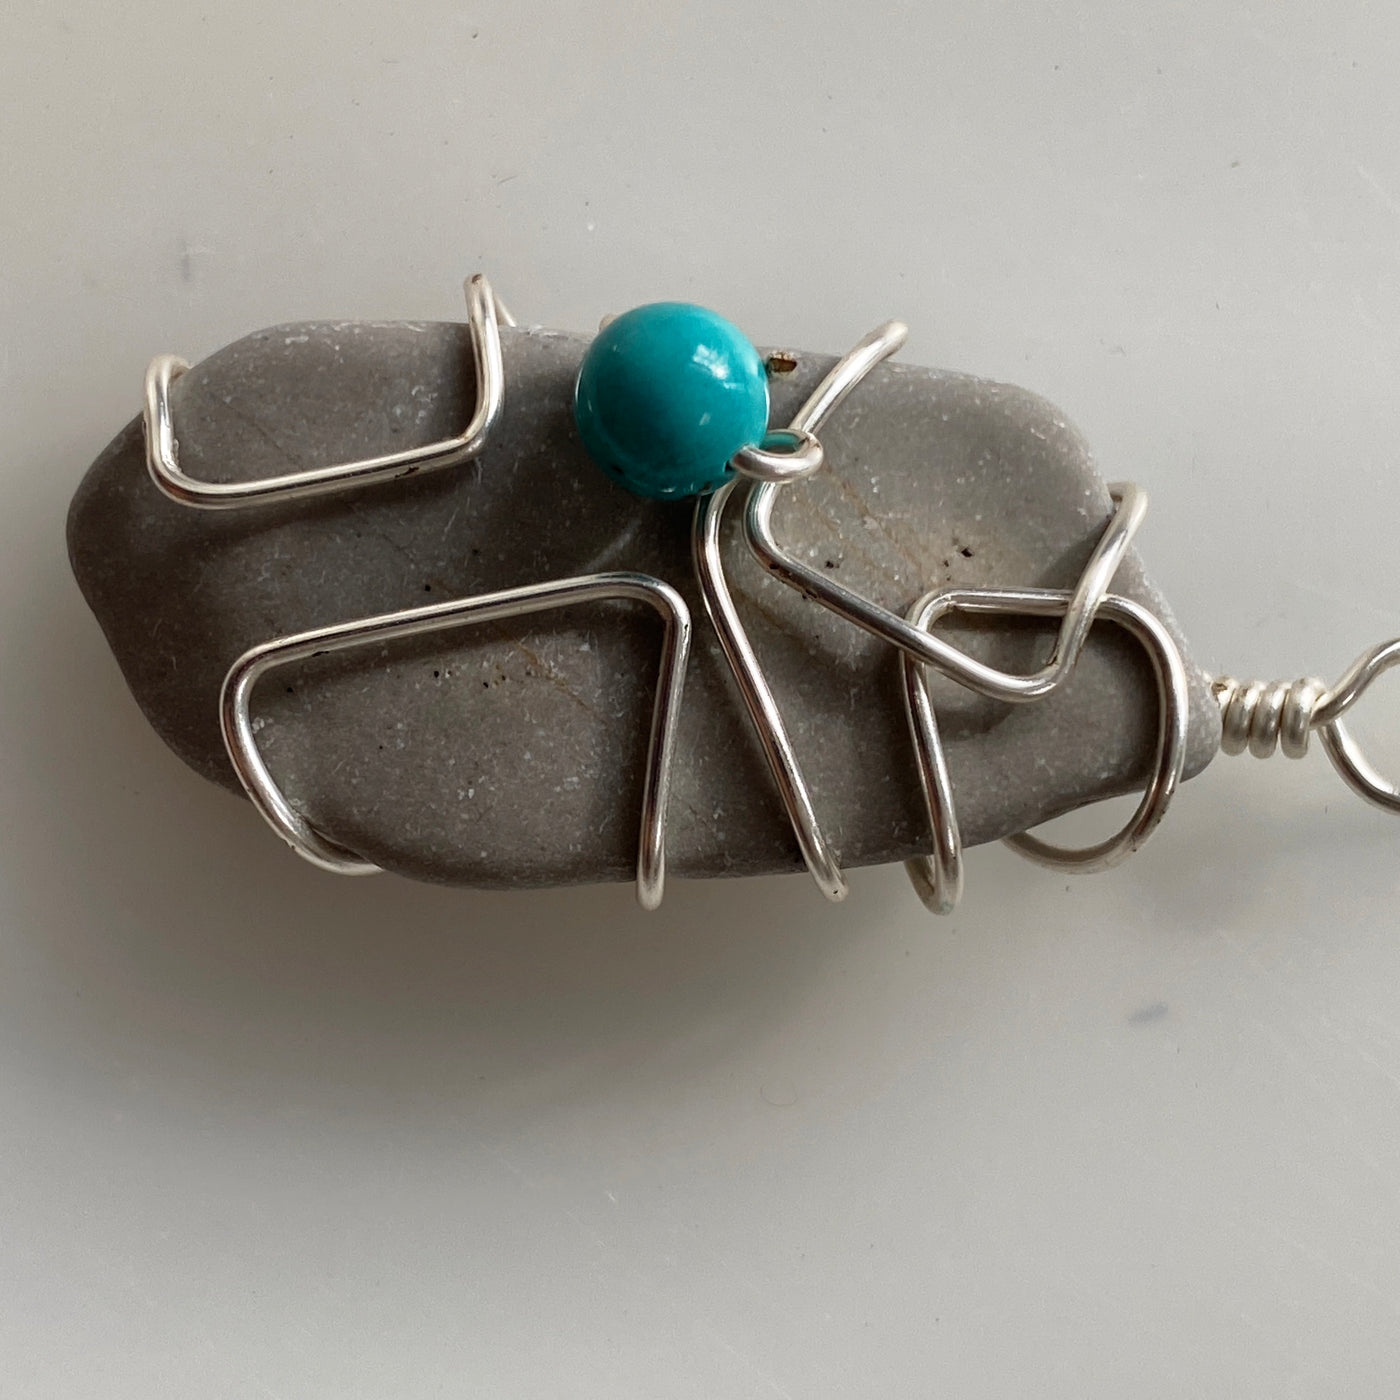 Medium pendant. Grey natural stone, turquoise and silver wire. Elbastones collection.